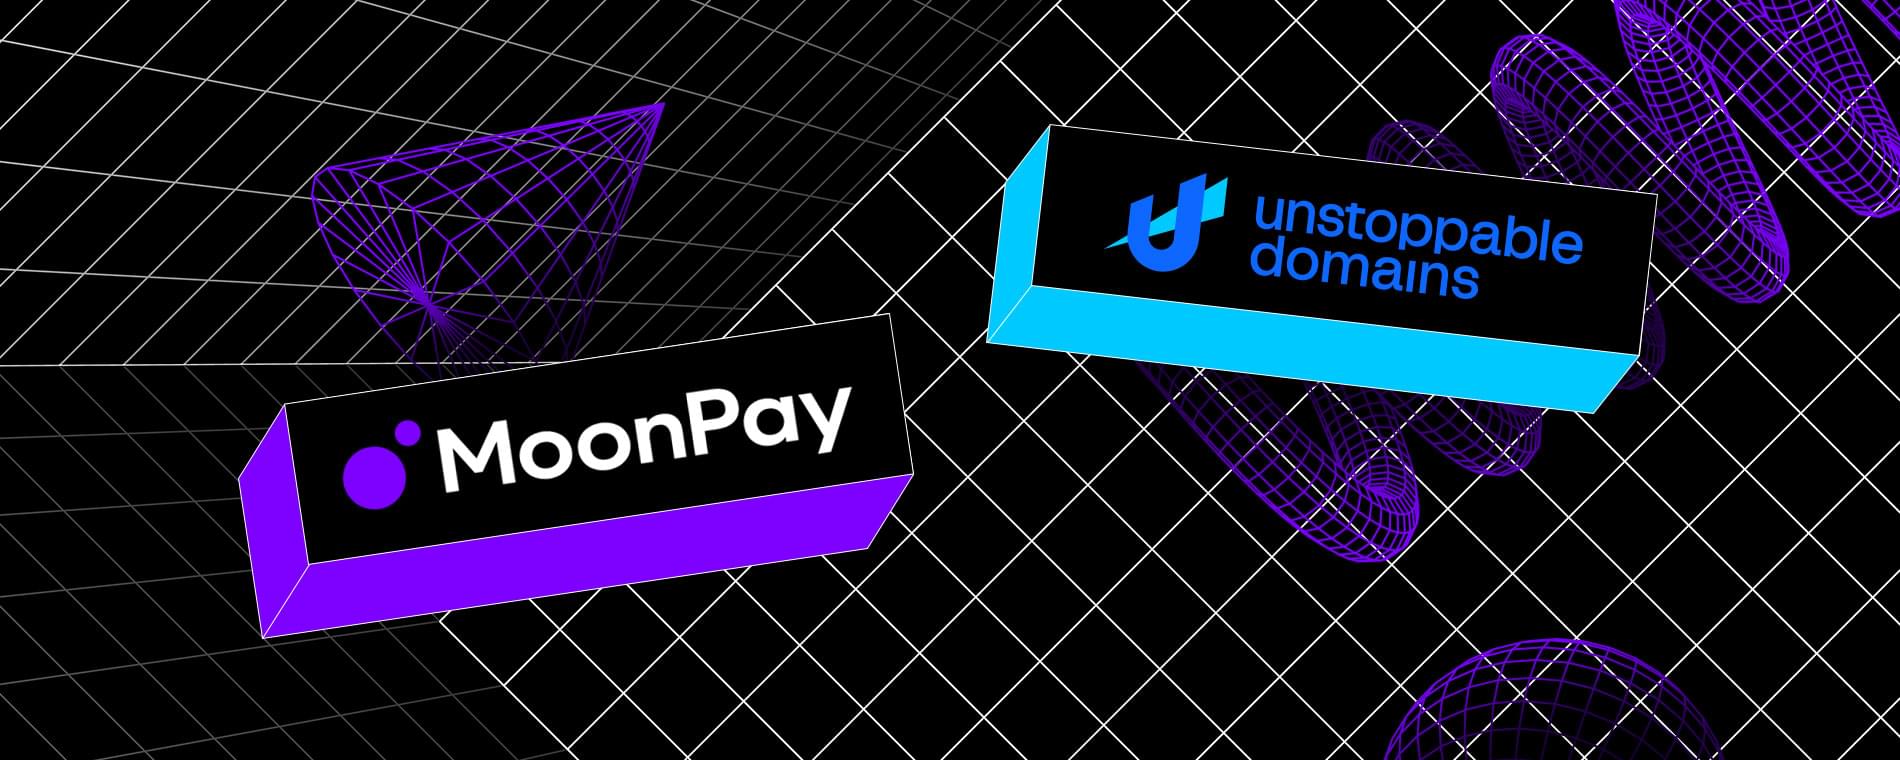 MoonPay teams with Unstoppable Domains for Web3 payments